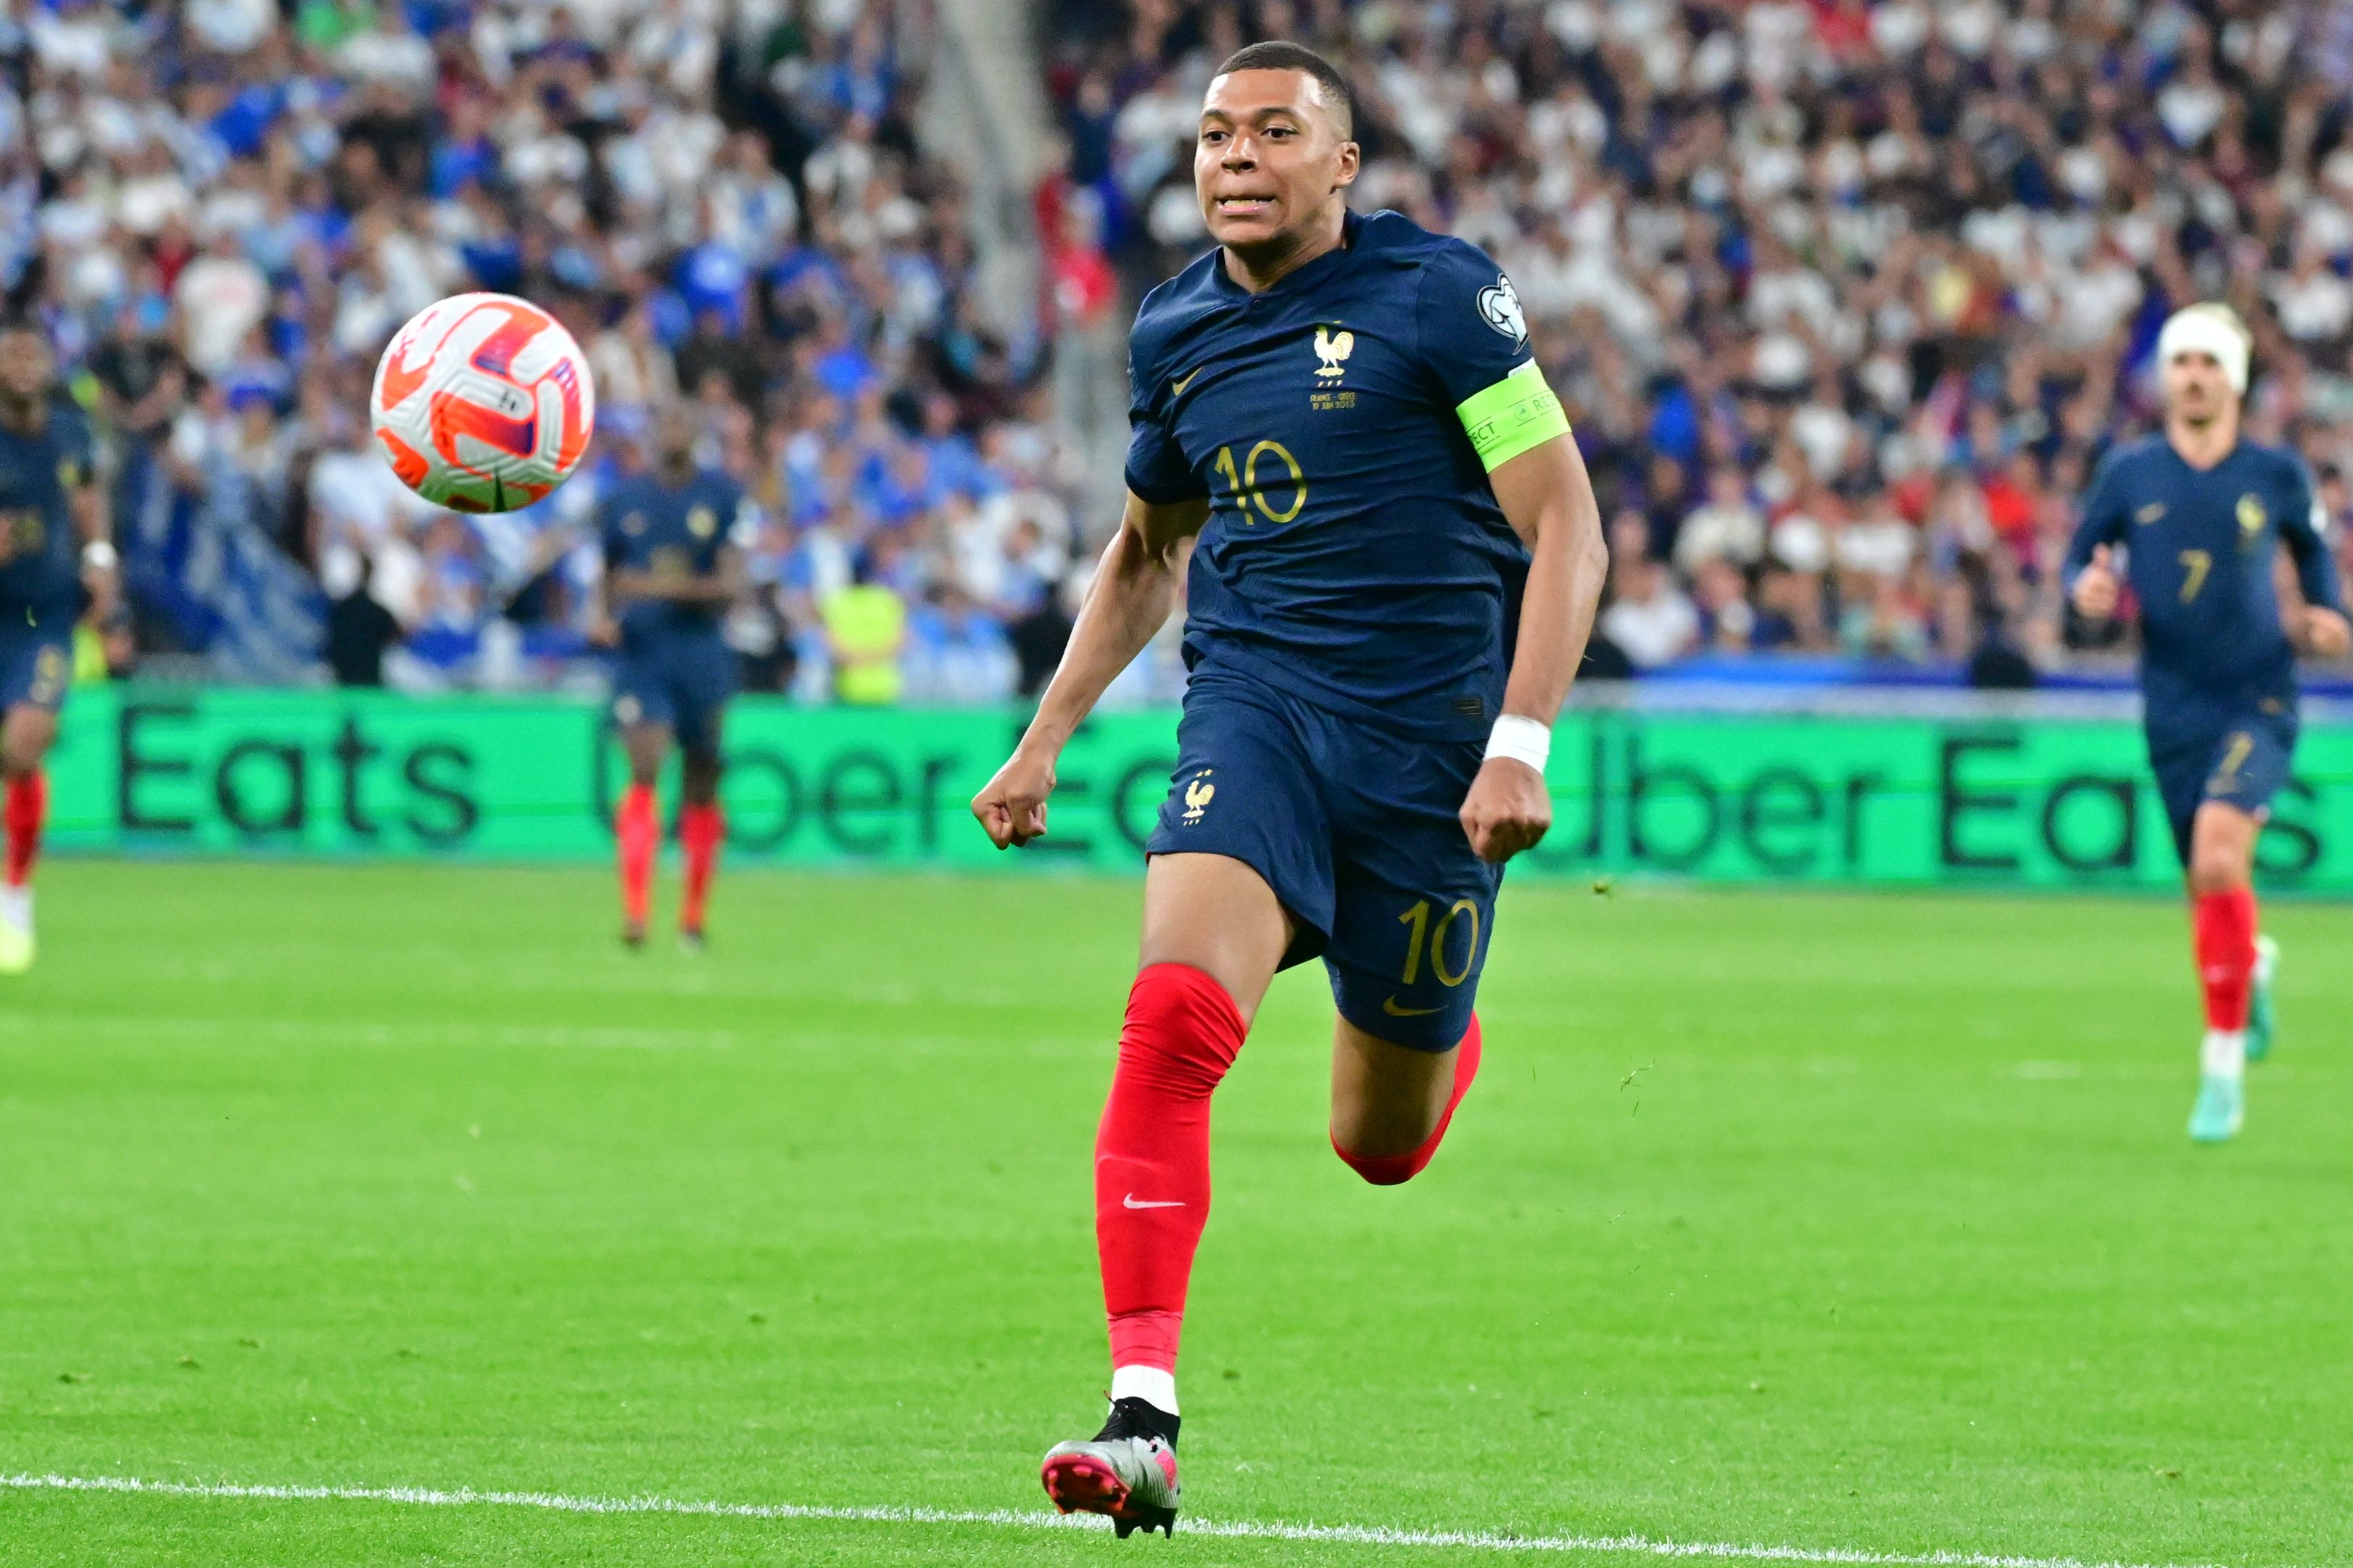 $1.1 Billion bid for Mbappé would make him the most expensive soccer player  in history